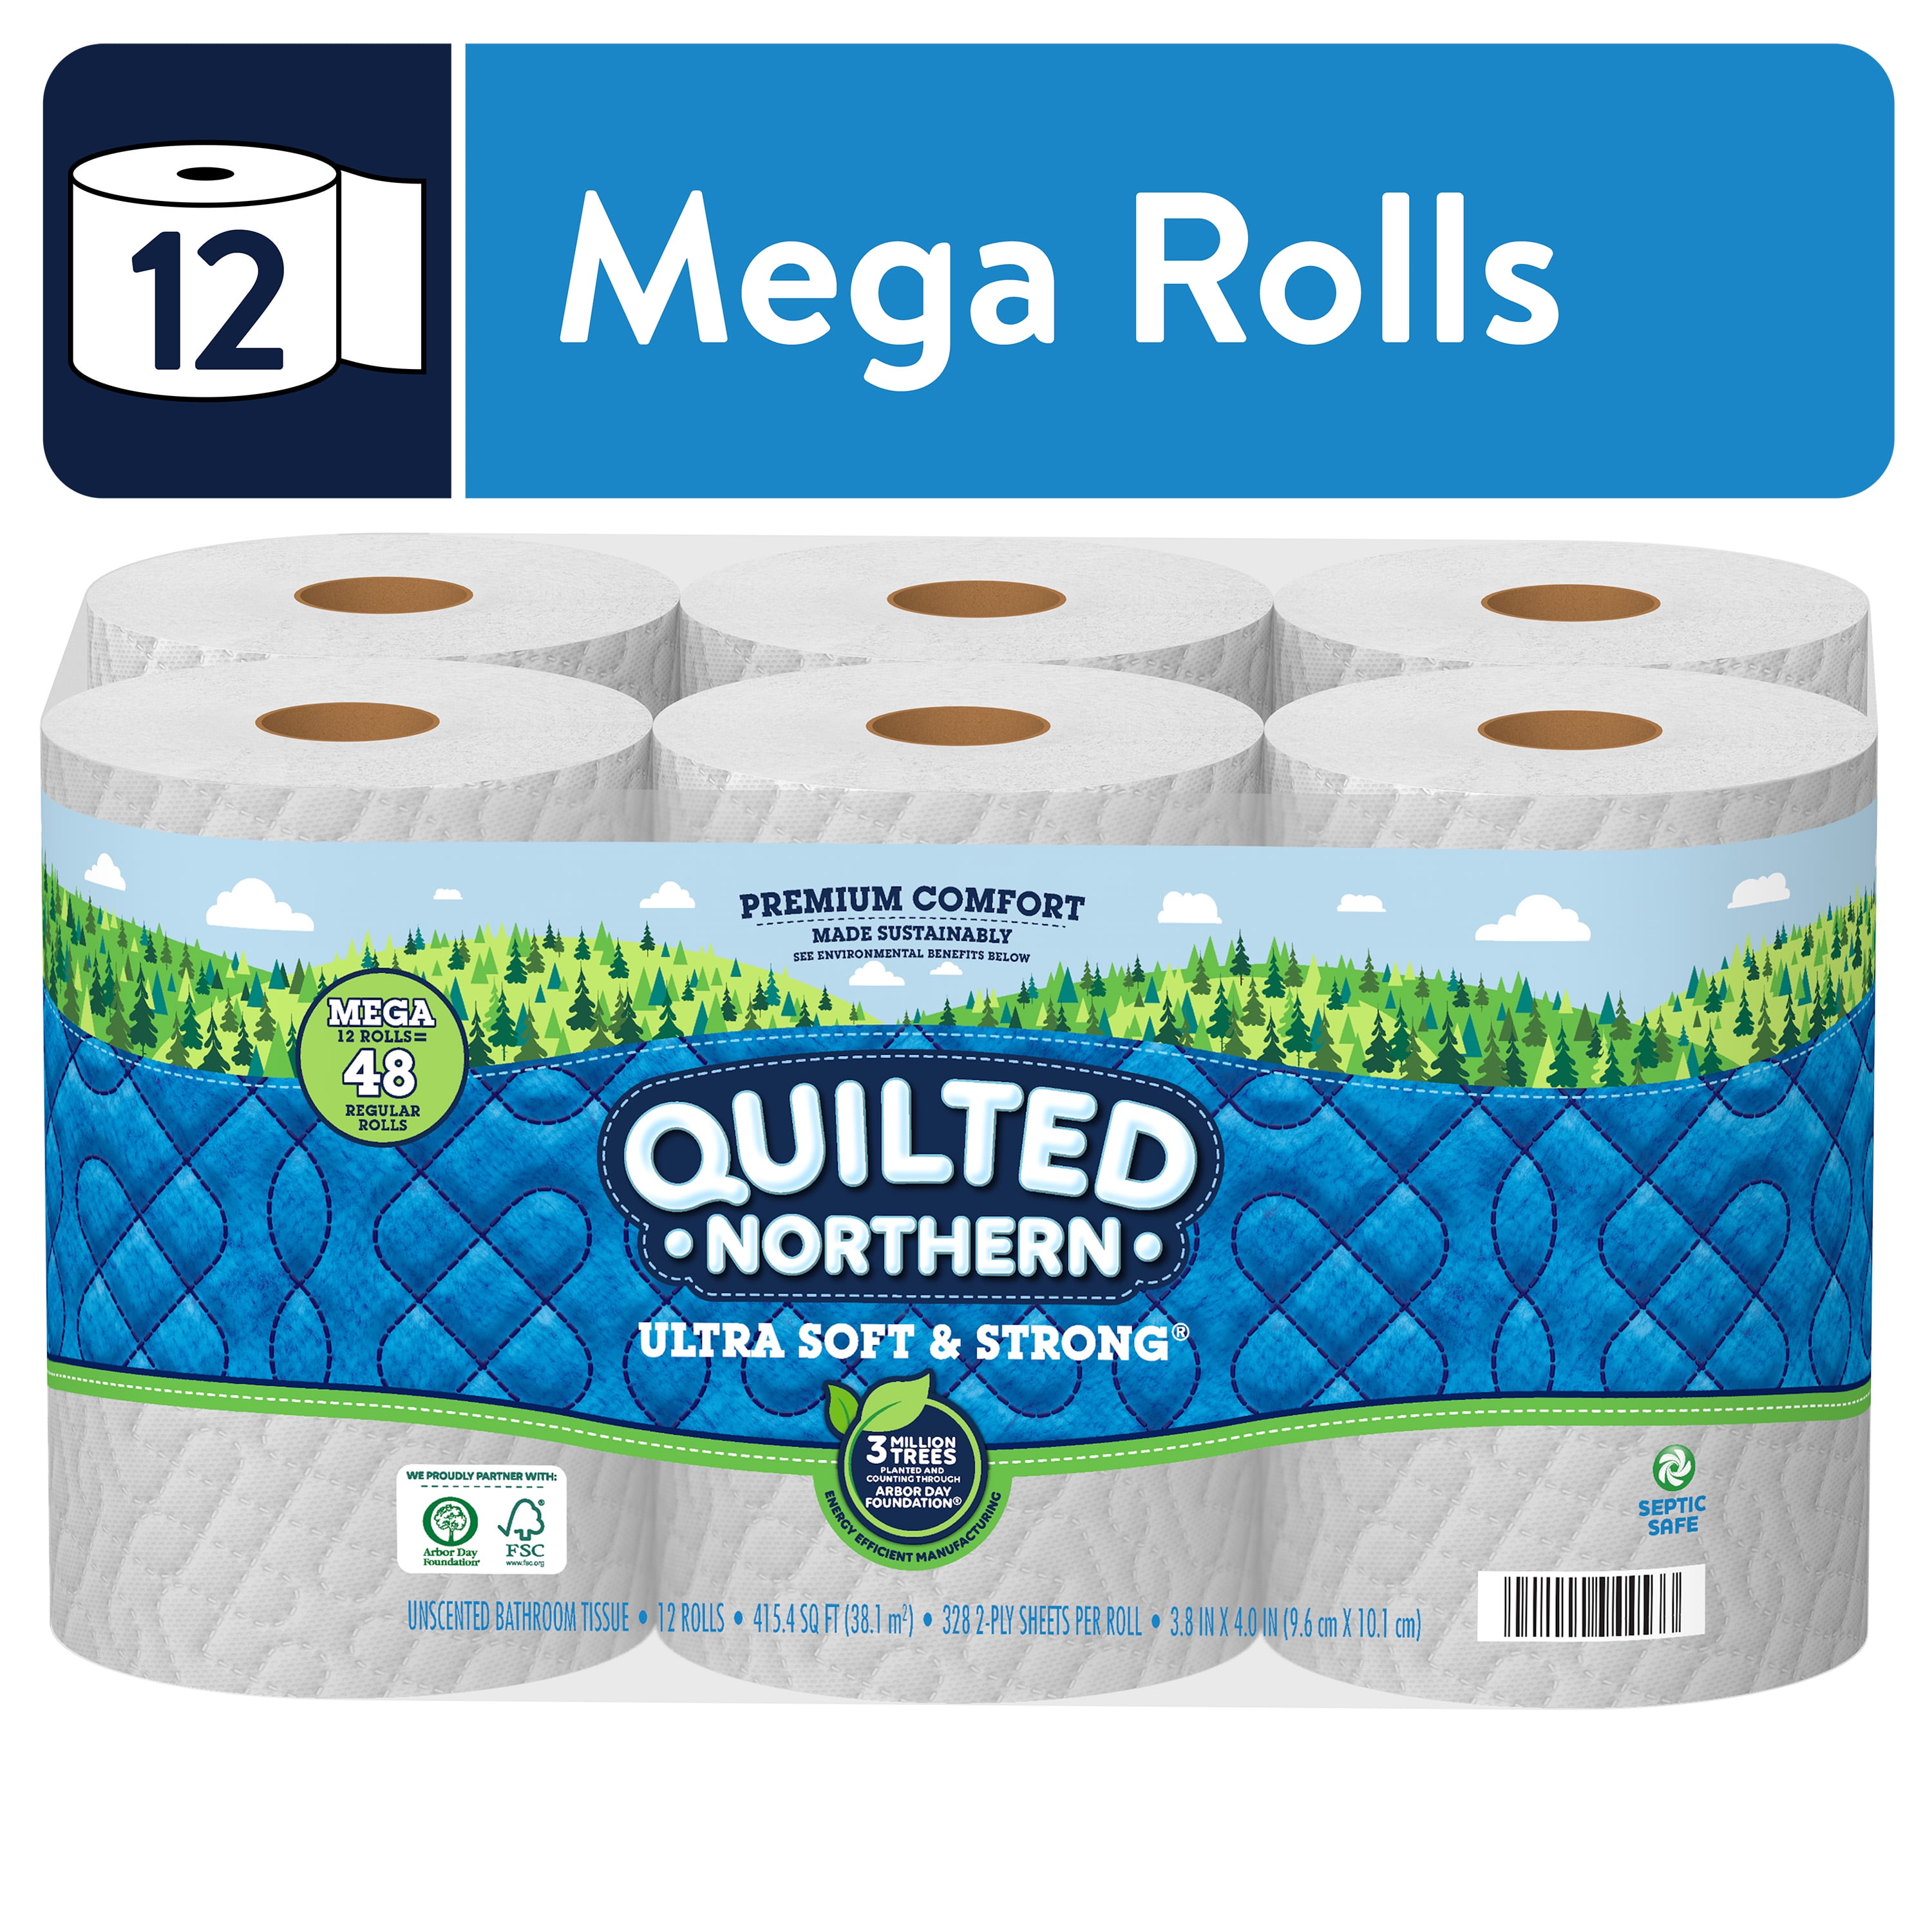 12 Mega Roll for sale online Quilted Northern 3 Ply Ultra Plush Toilet Paper 